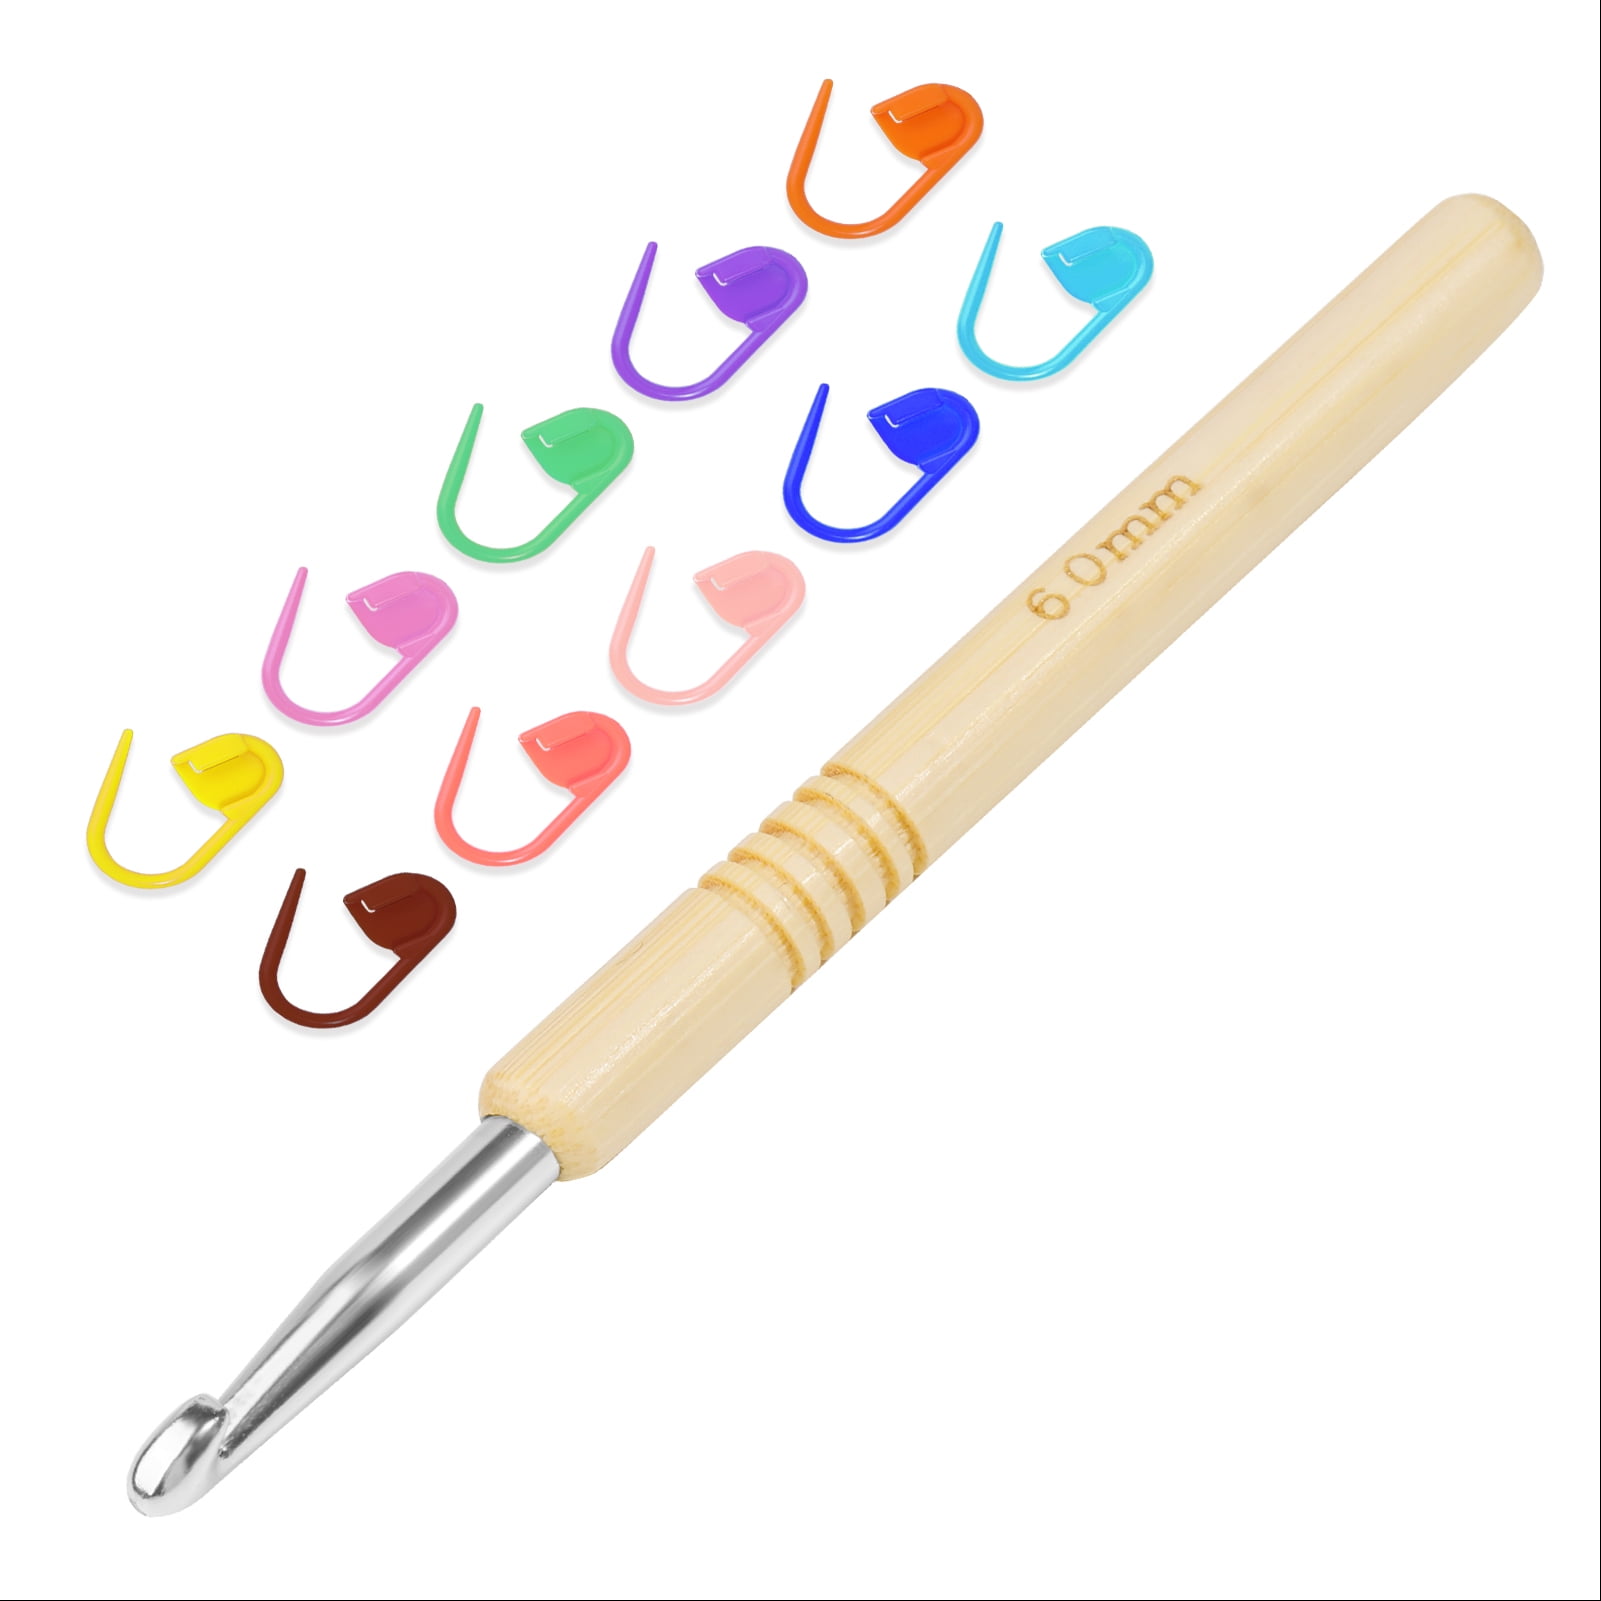 3mm Crochet Hook, Wooden Handle Crochet, Ergonomic Crochet with 10 PCS  Stitch Markers for Arthritic Hand, and Beginners and Lovers DIY 